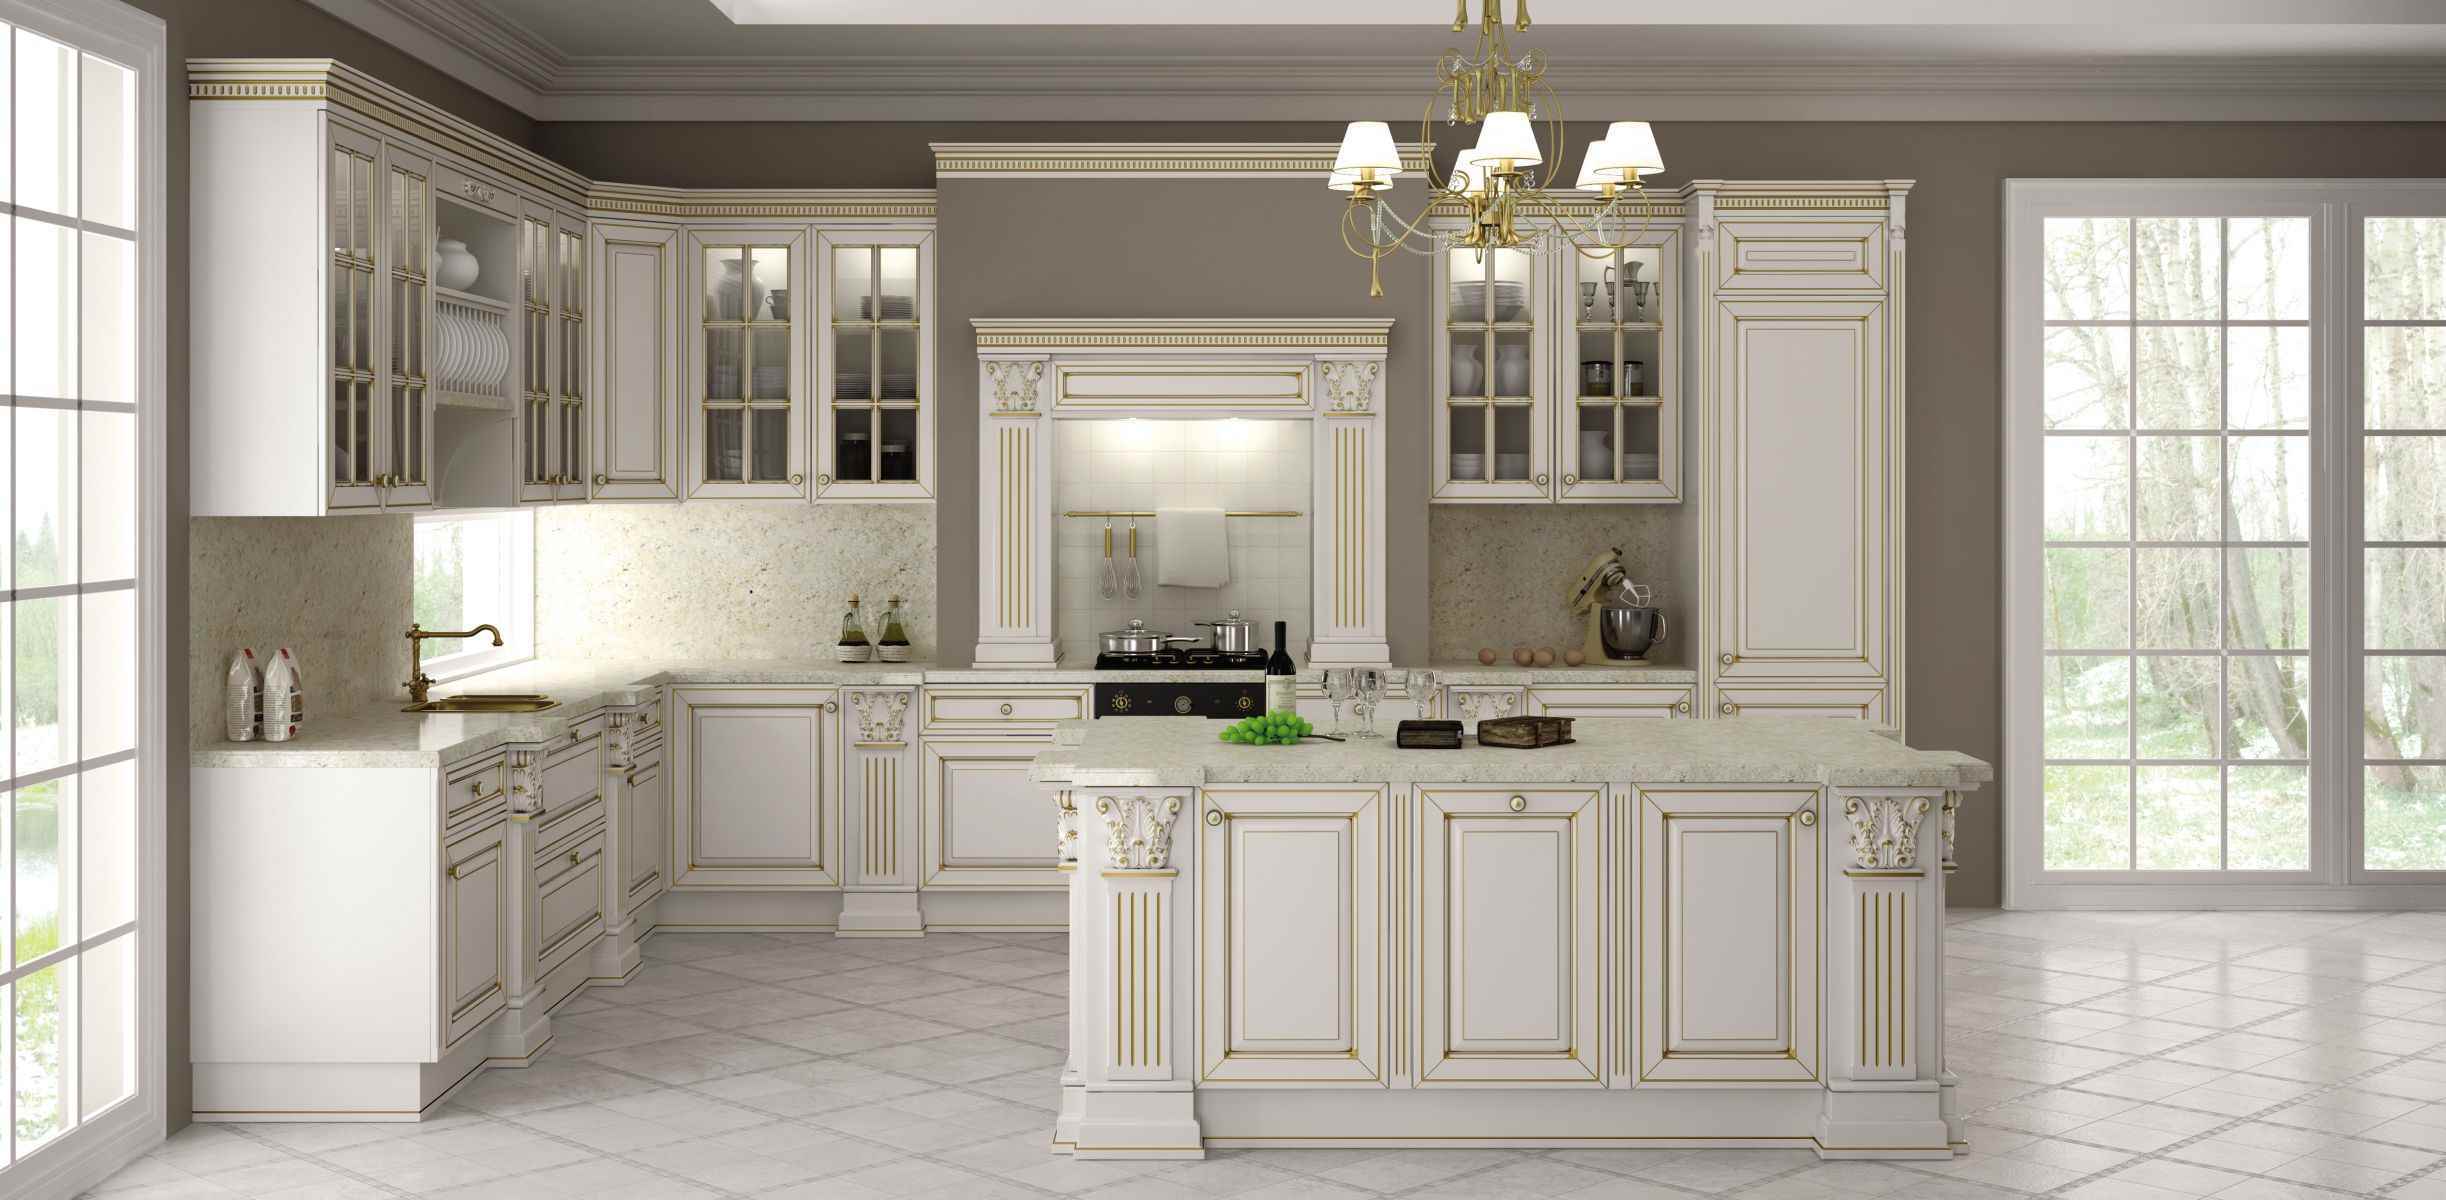 version of the unusual design of the kitchen in a classic style